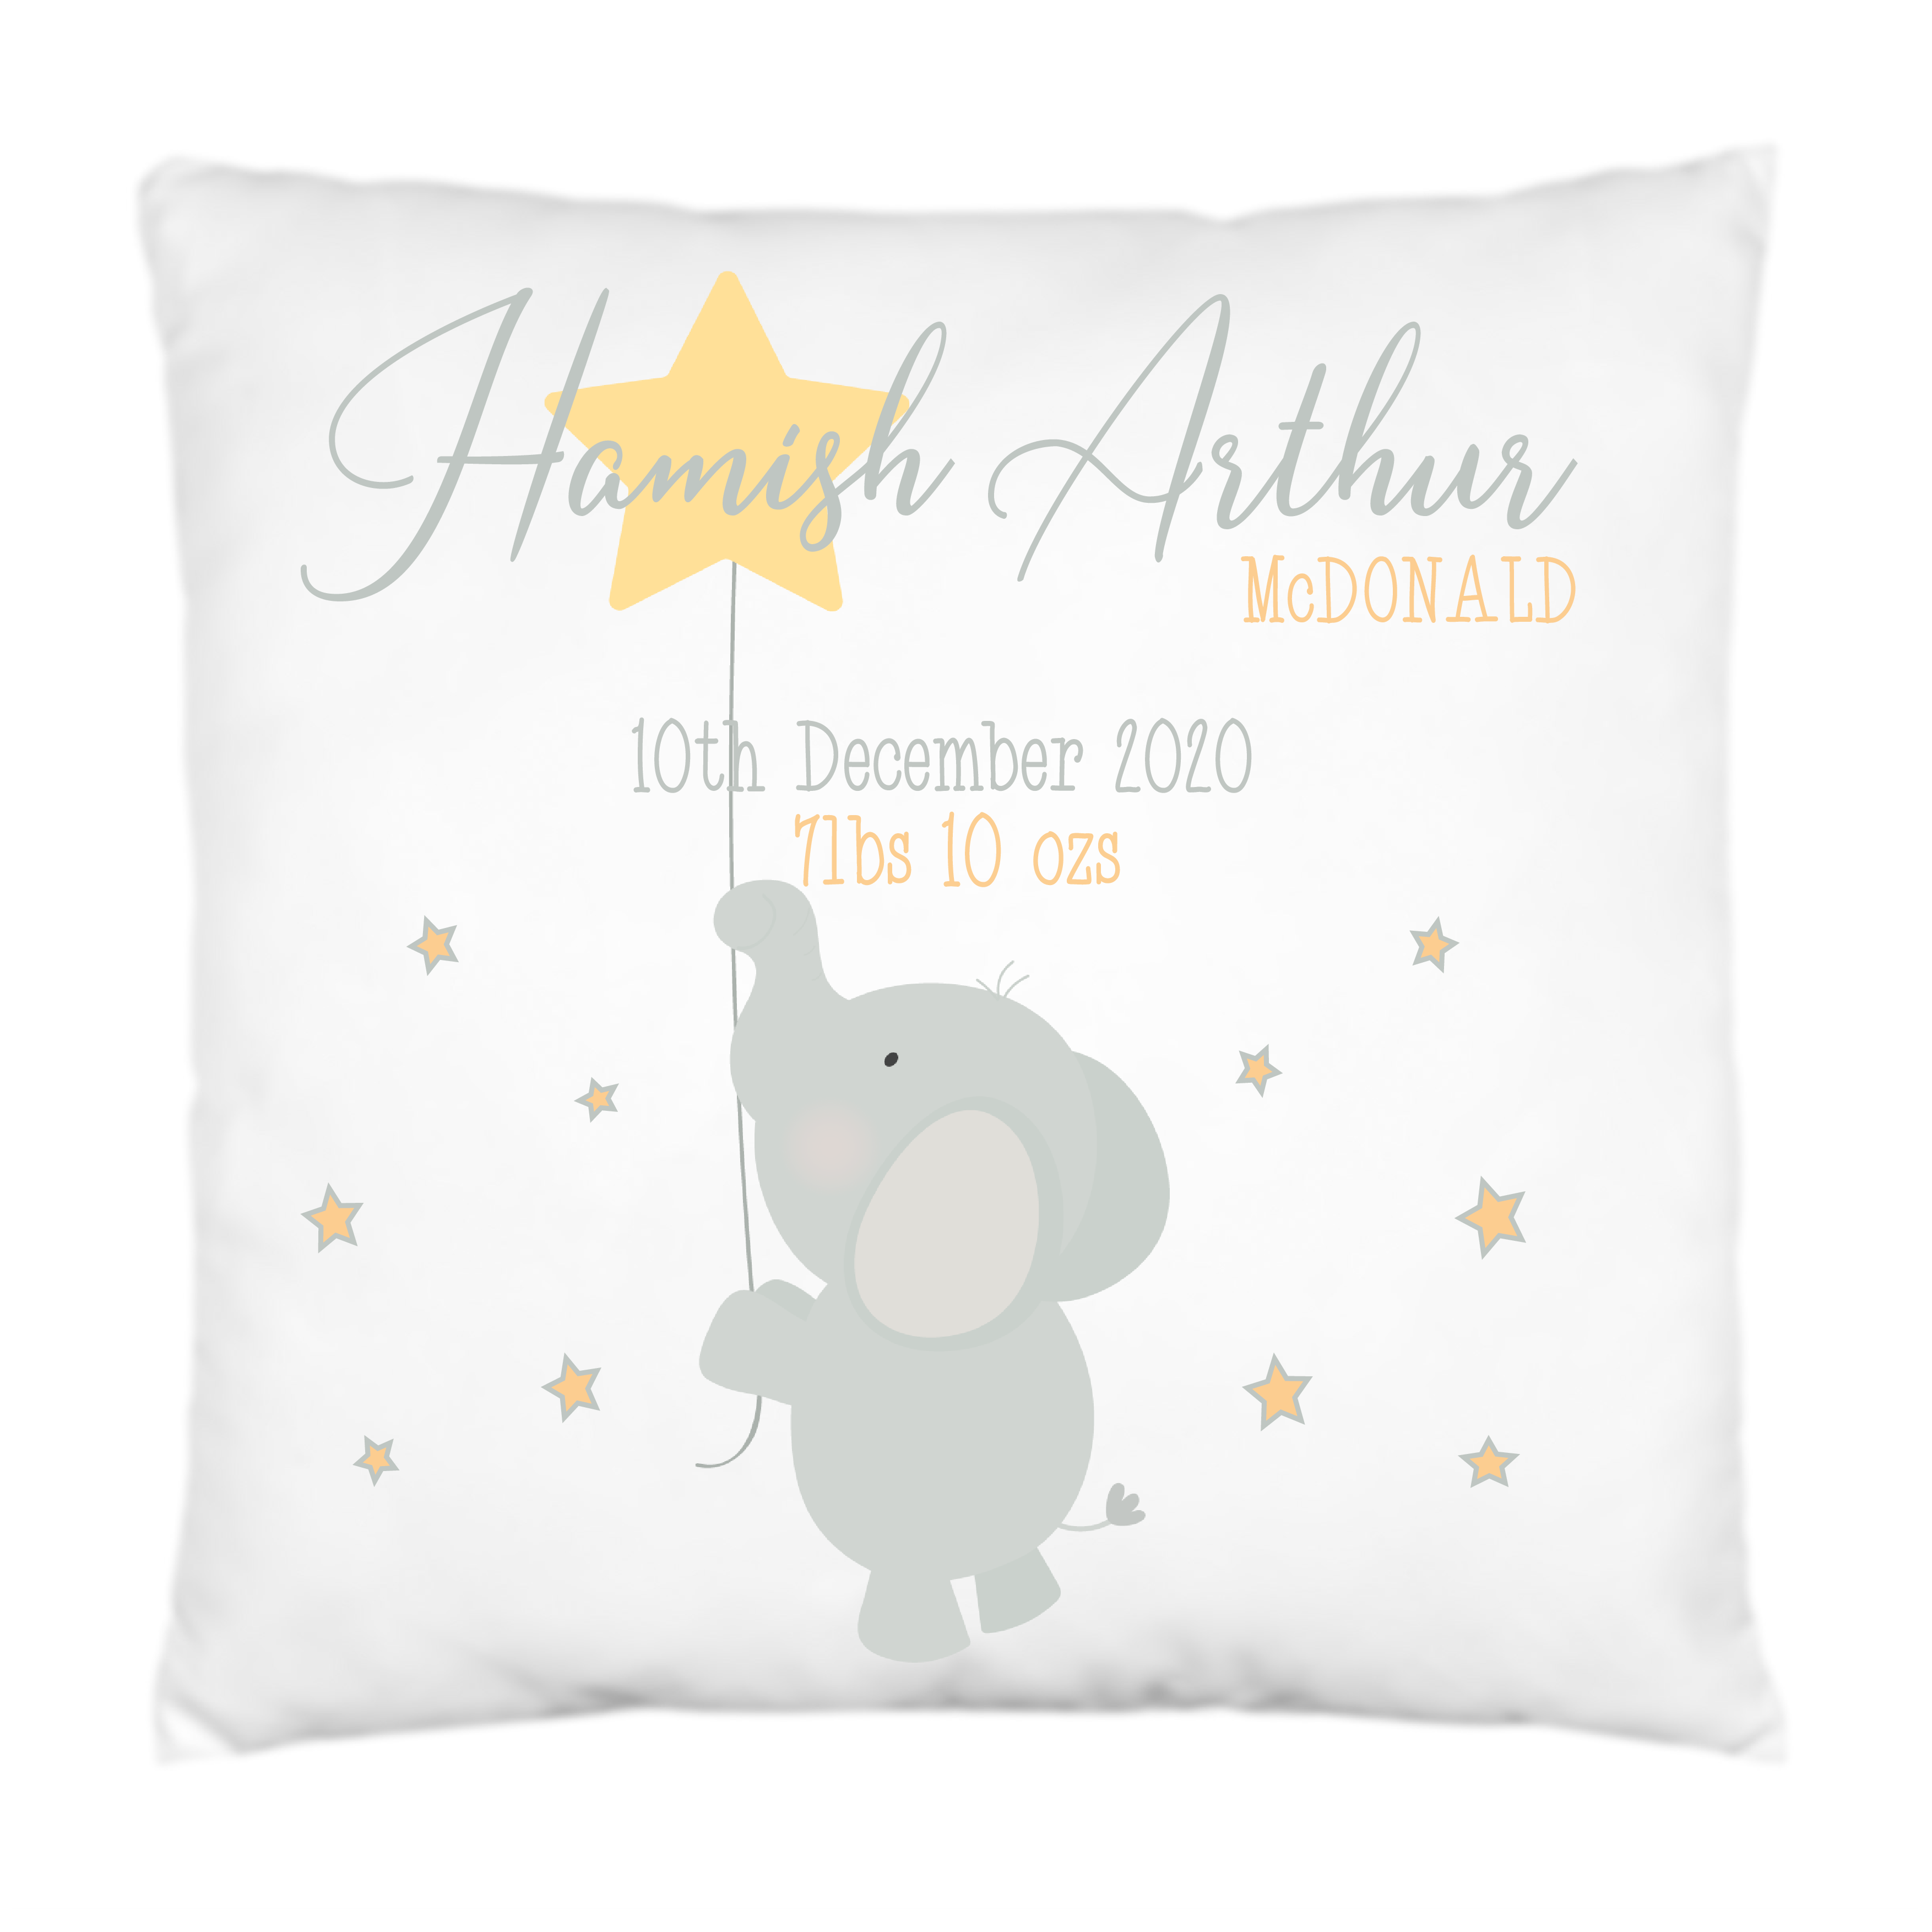 Personalised cushion for baby boy,new baby gift,childrens cushions